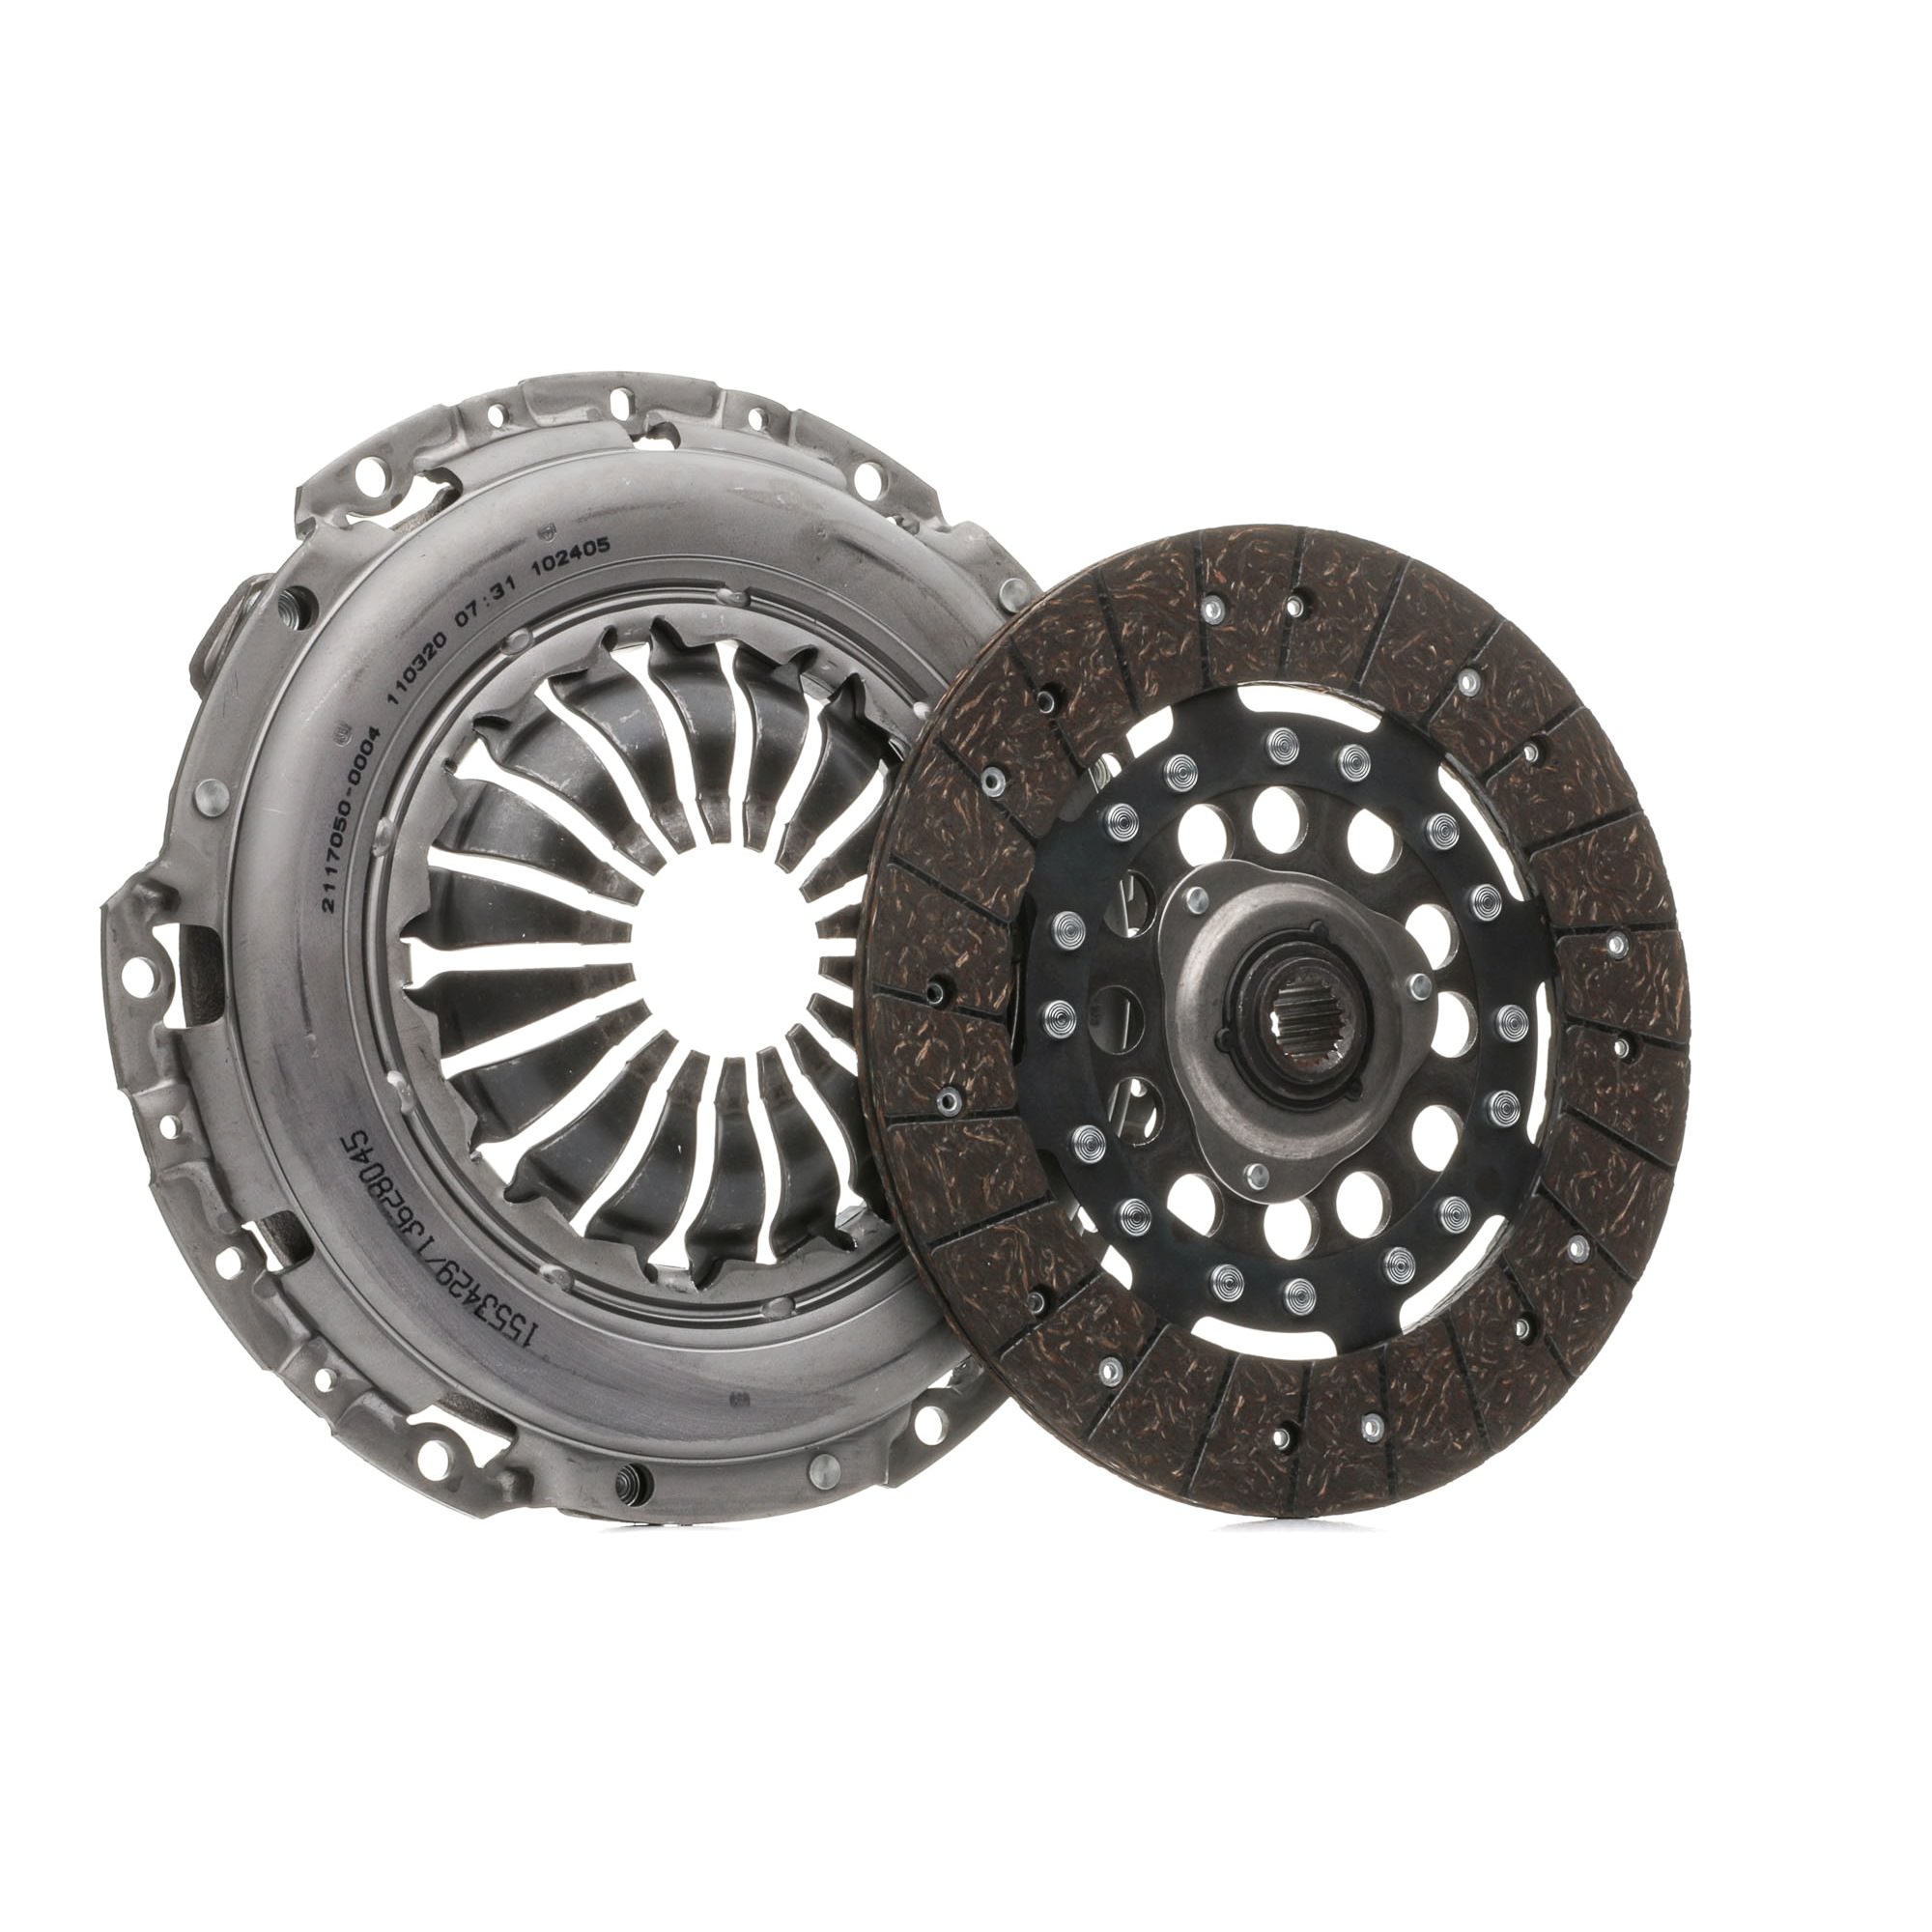 RIDEX 479C0136 Clutch kit with clutch pressure plate, without central slave cylinder, with clutch disc, 240, 239mm